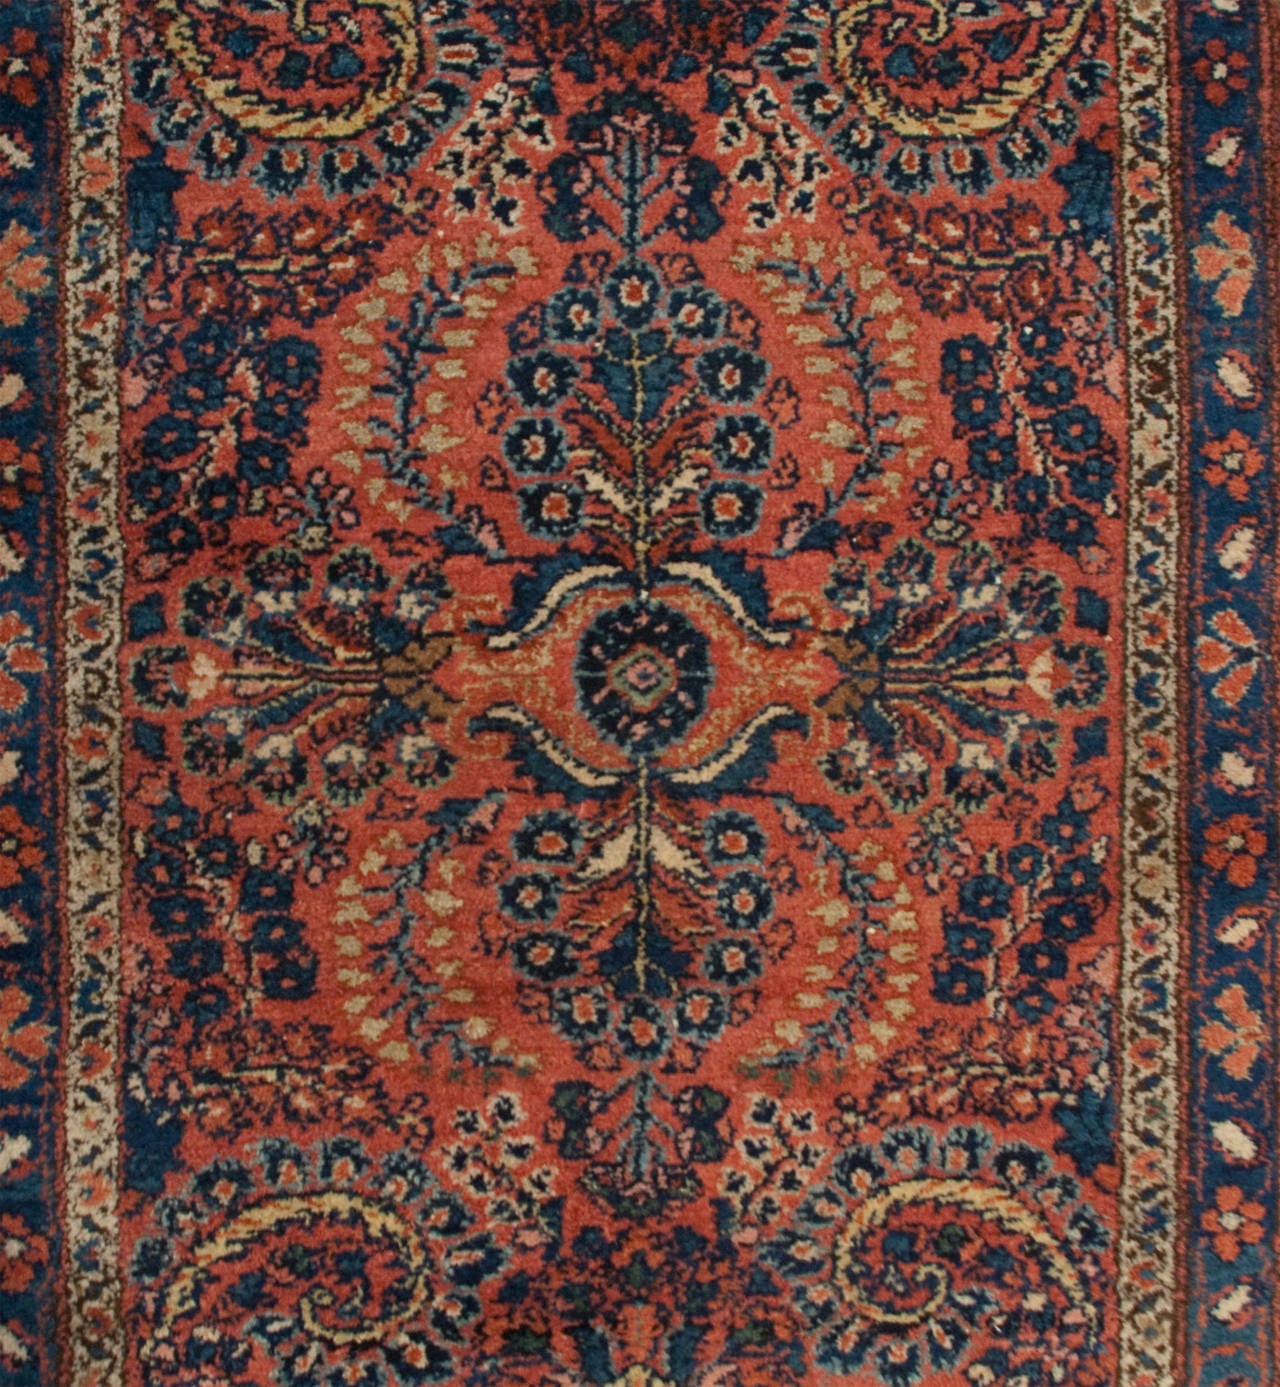 An early 20th century Persian Lilihan runner with a beautiful symmetrical multicolored tree-of-life pattern on a ruby background, surrounded by a complementary floral border.